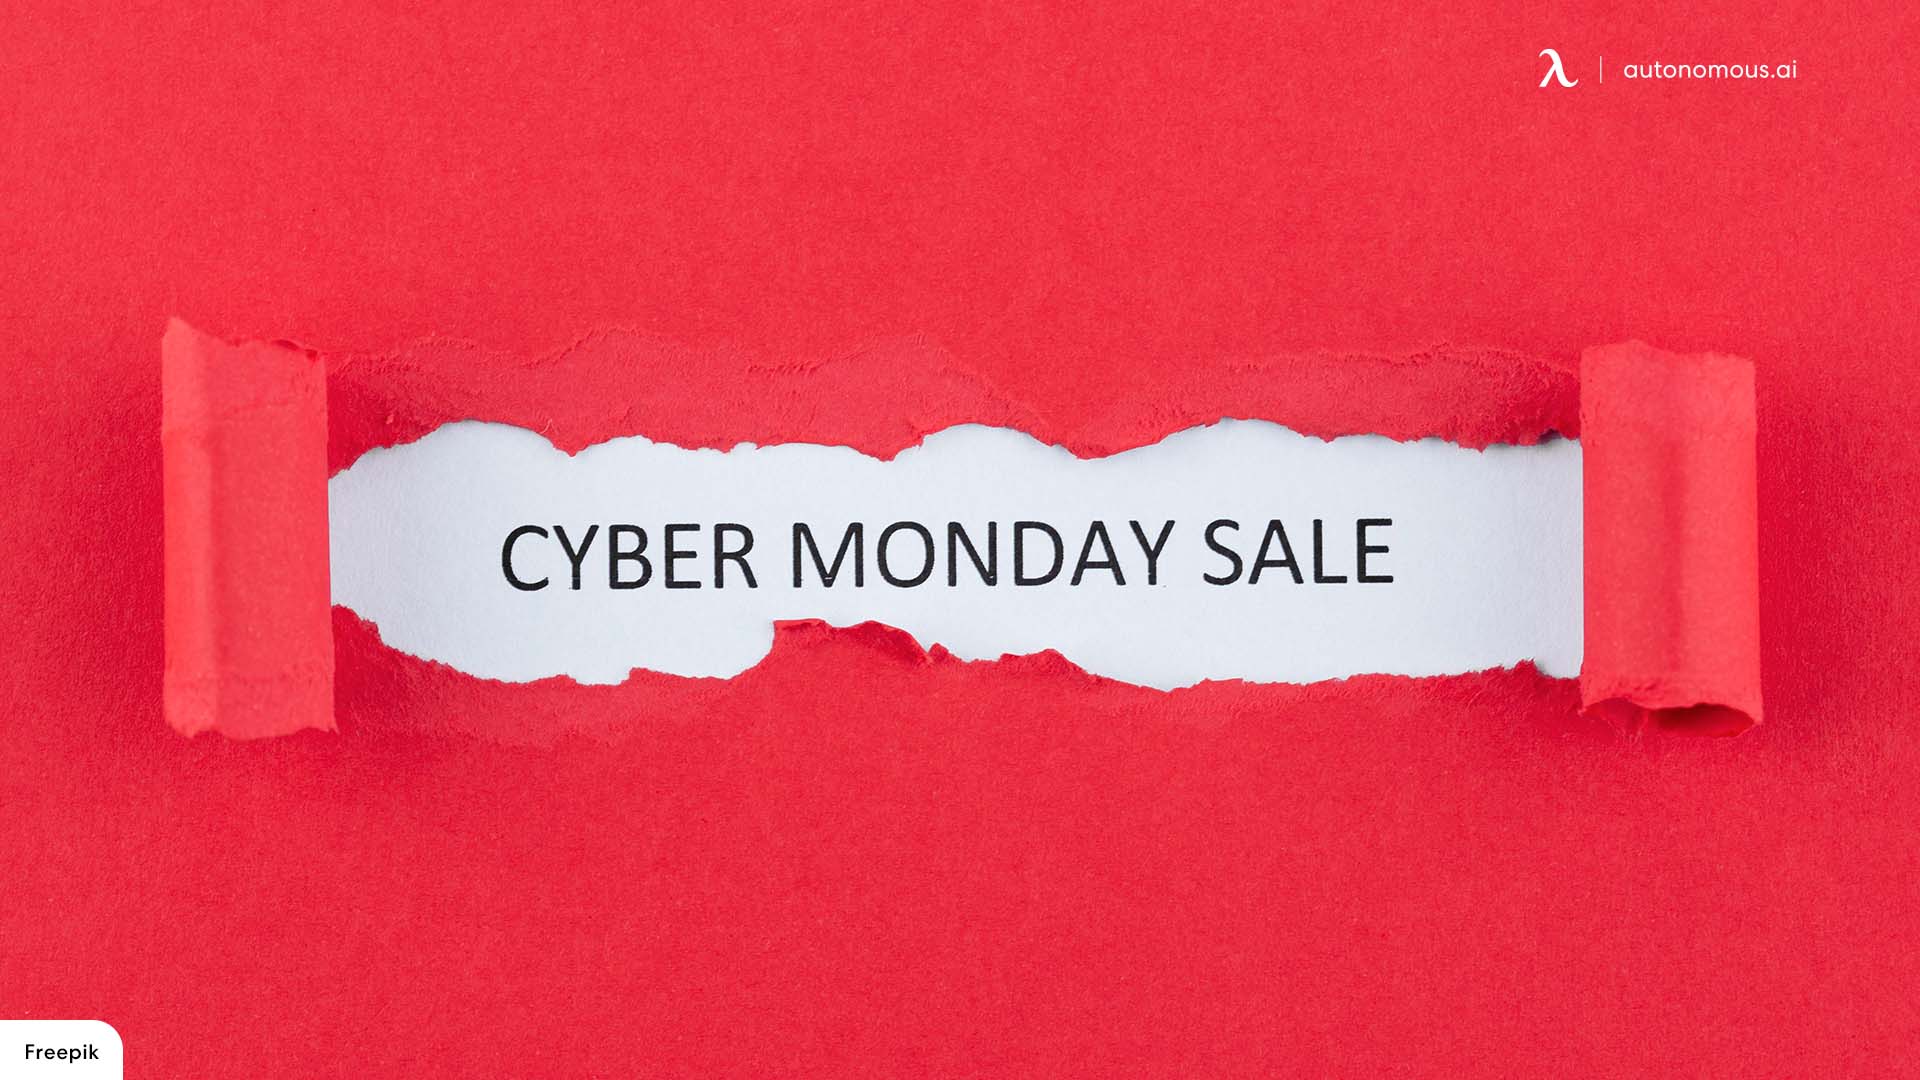 What is Cyber Monday